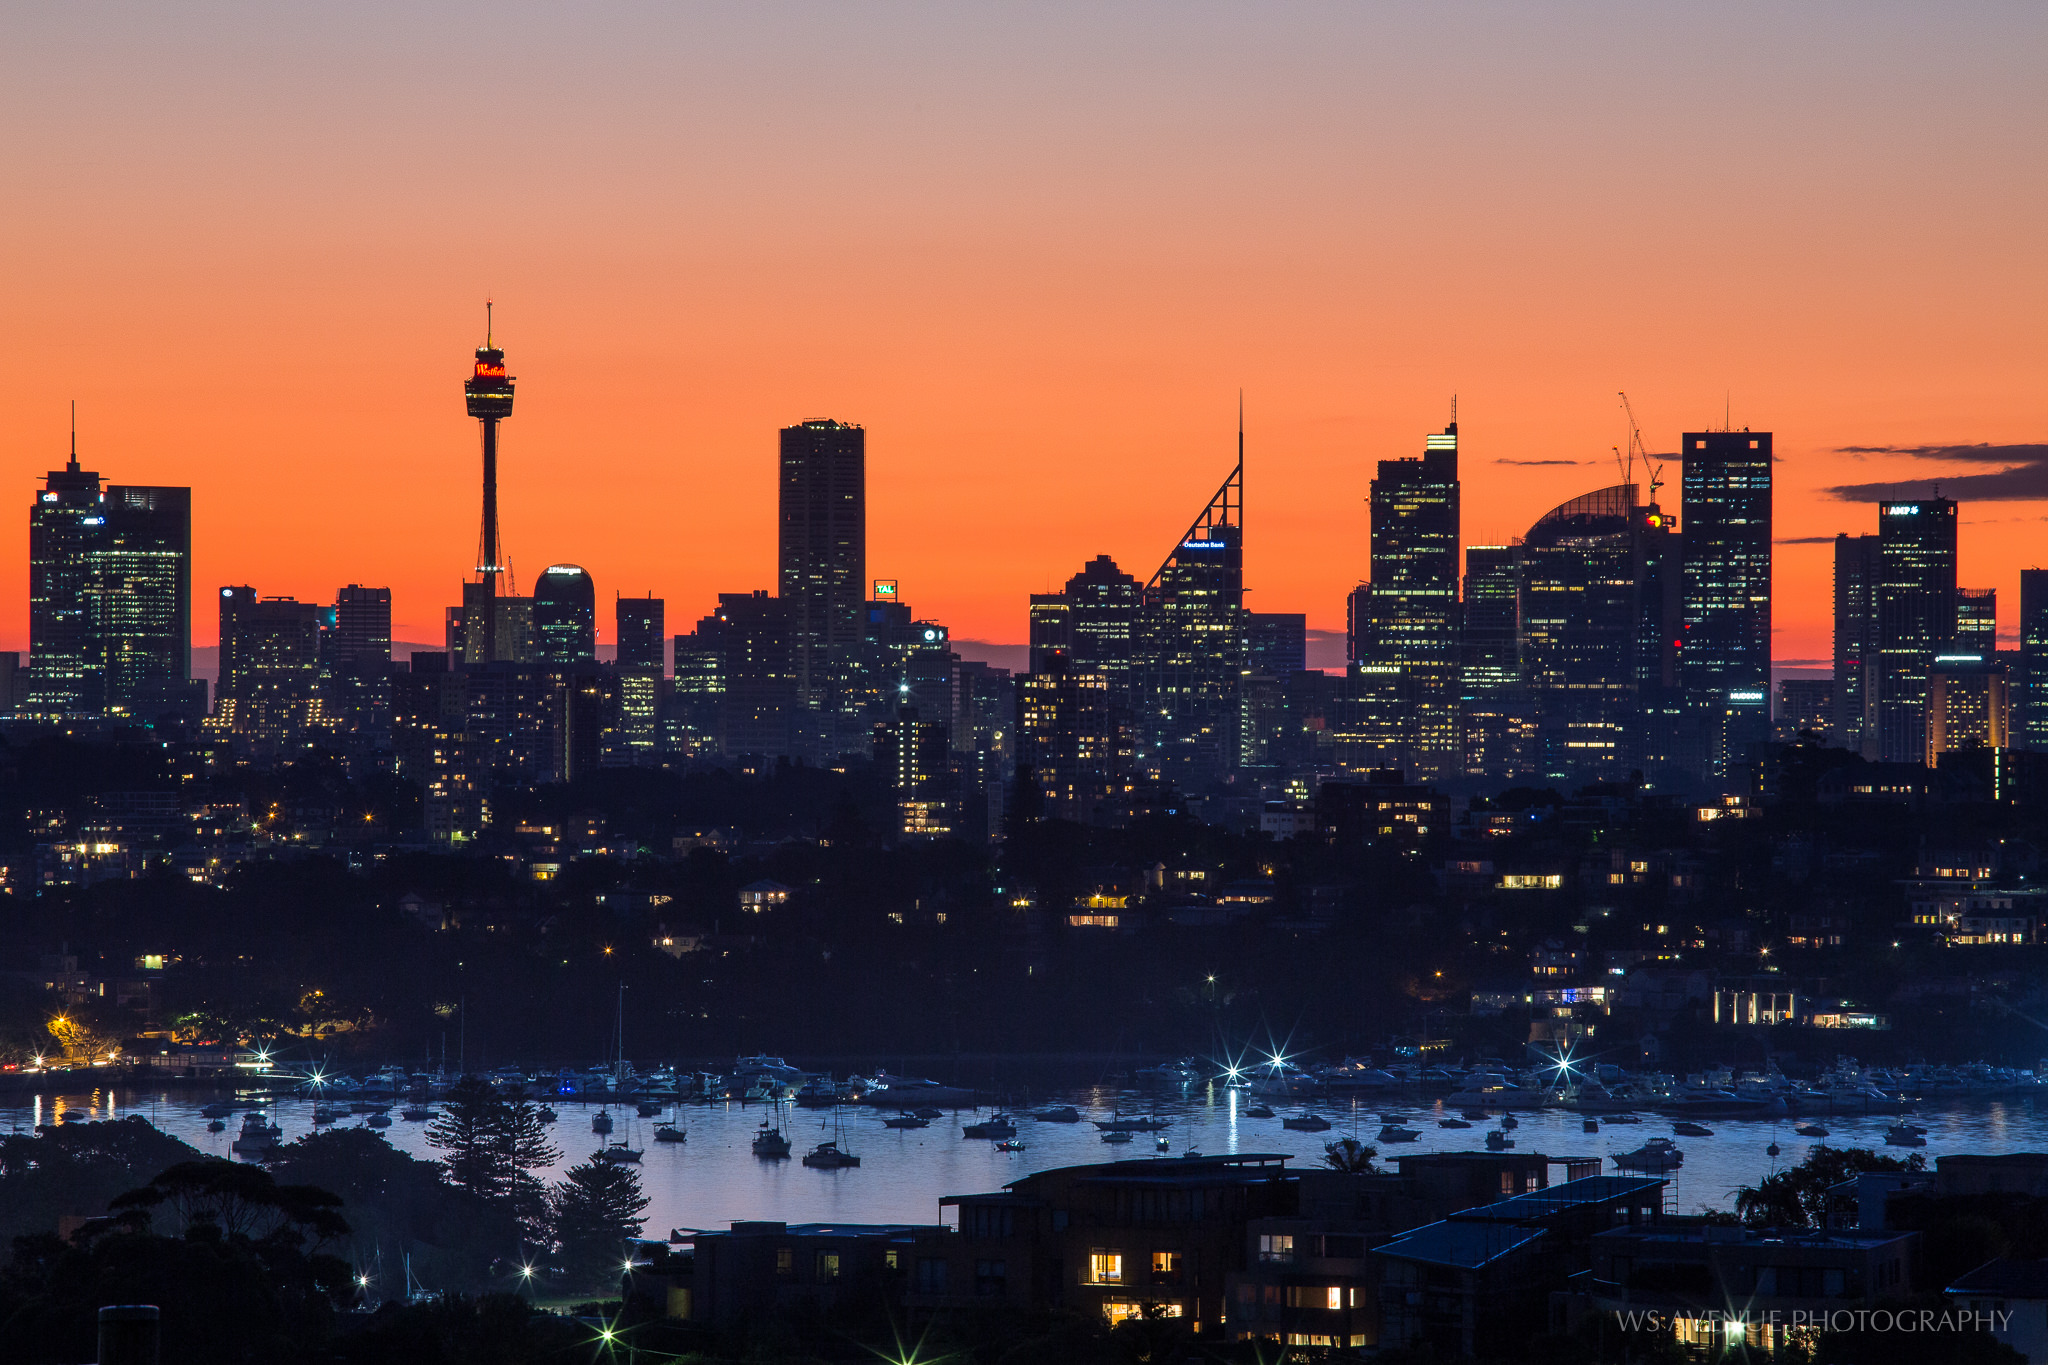 The Sydney cityscape at sunset from Dover Heights | WT JOURNAL